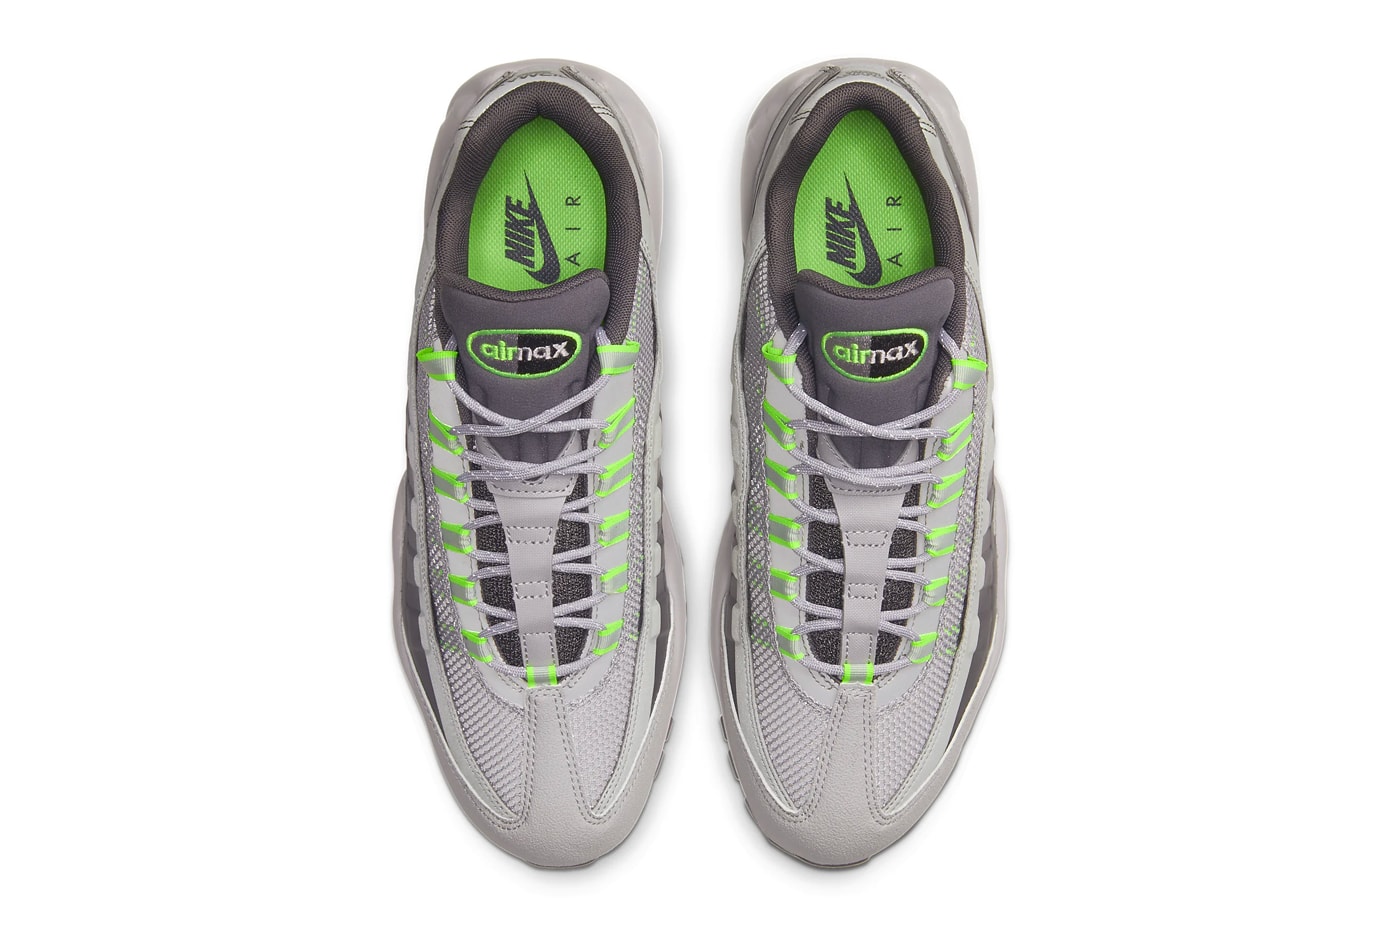 nike air max 95 utility electric green weather resistant BQ5616-002 beaverton sneakers shoes 